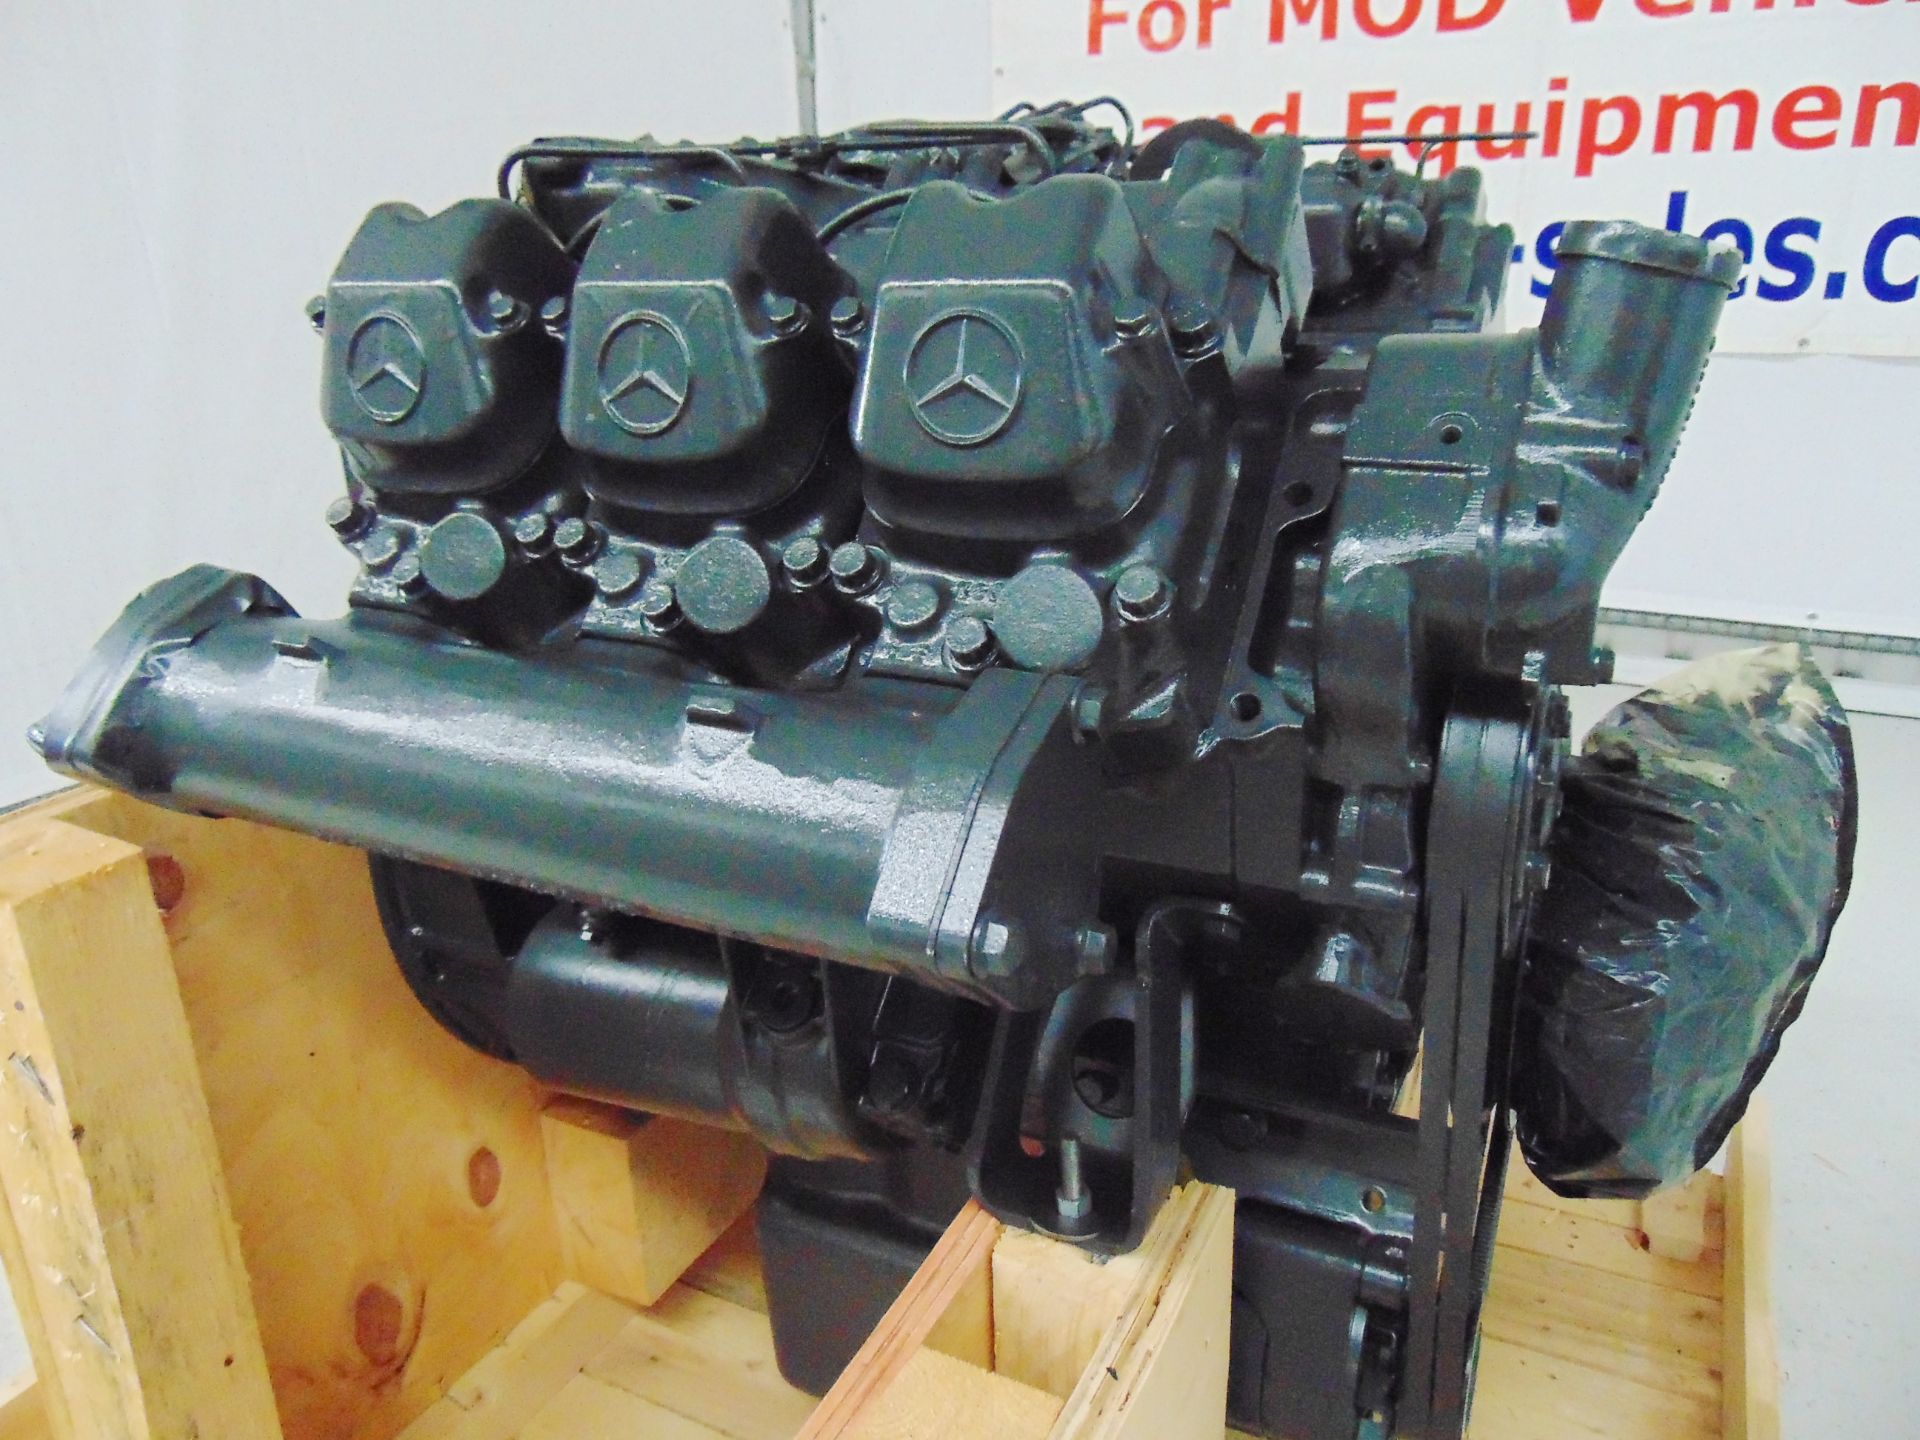 Factory Reconditioned Mercedes-Benz OM441 V6 Turbo Diesel Engine - Image 3 of 14